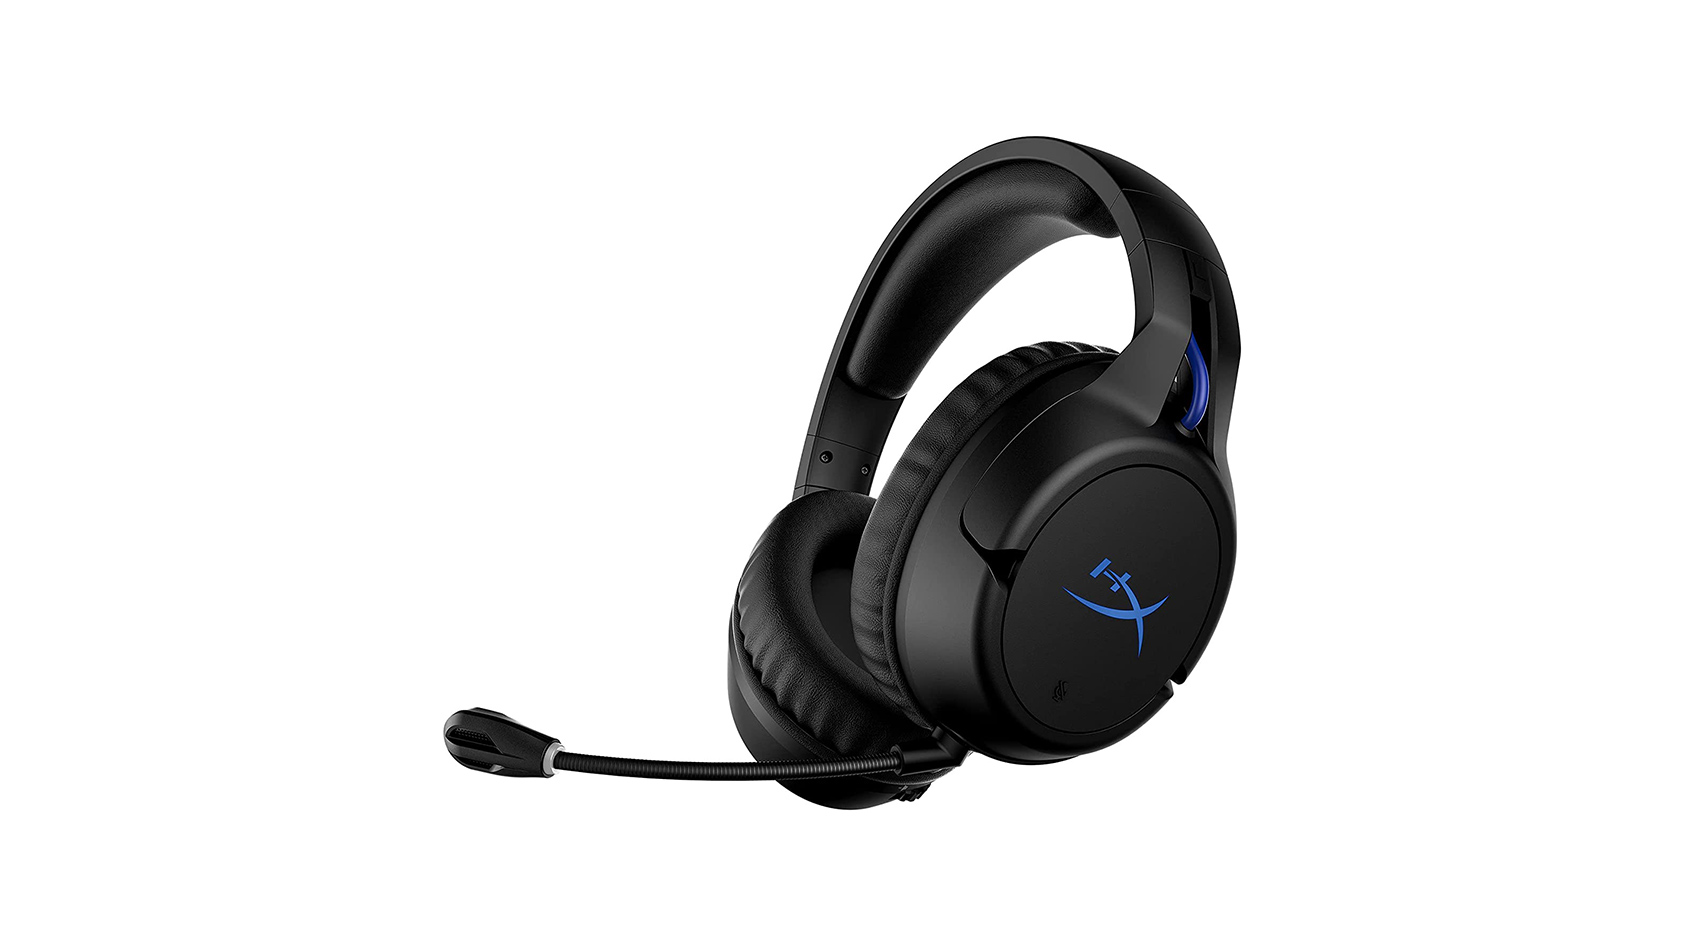 The HyperX Cloud Flight Wireless in black/blue against a white background.